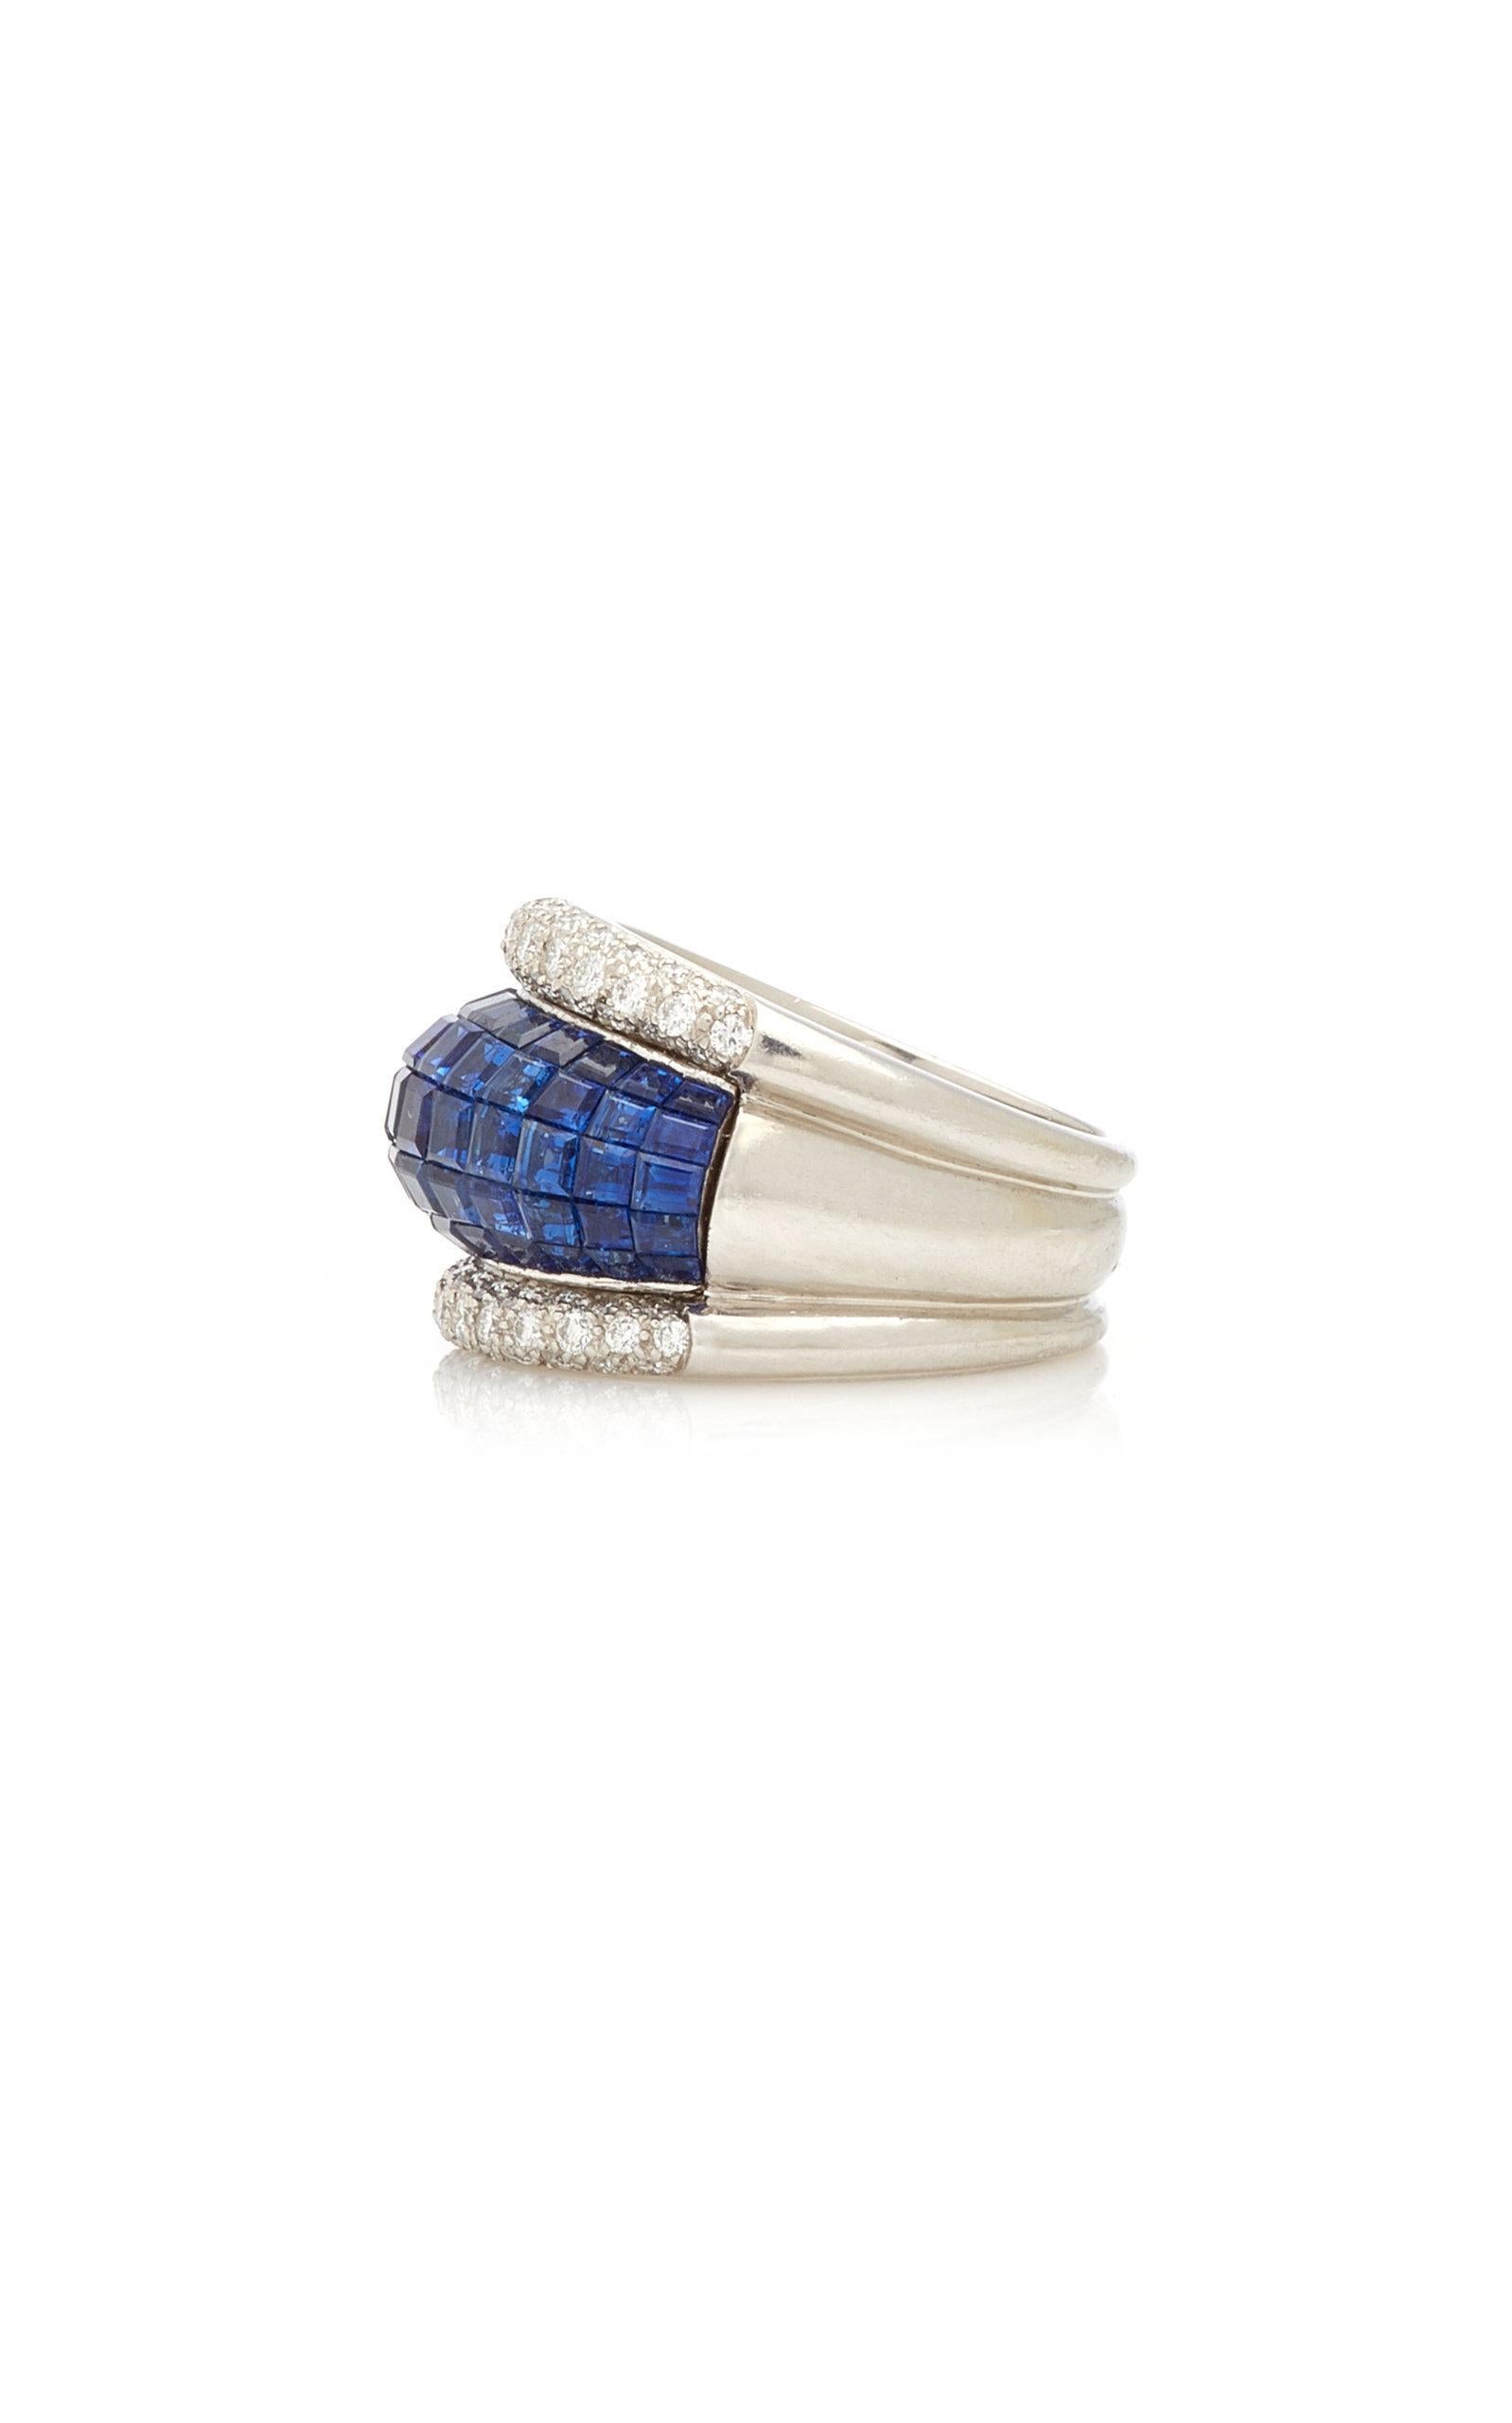 Women's or Men's Invisible Set Sapphire and Diamond Ring